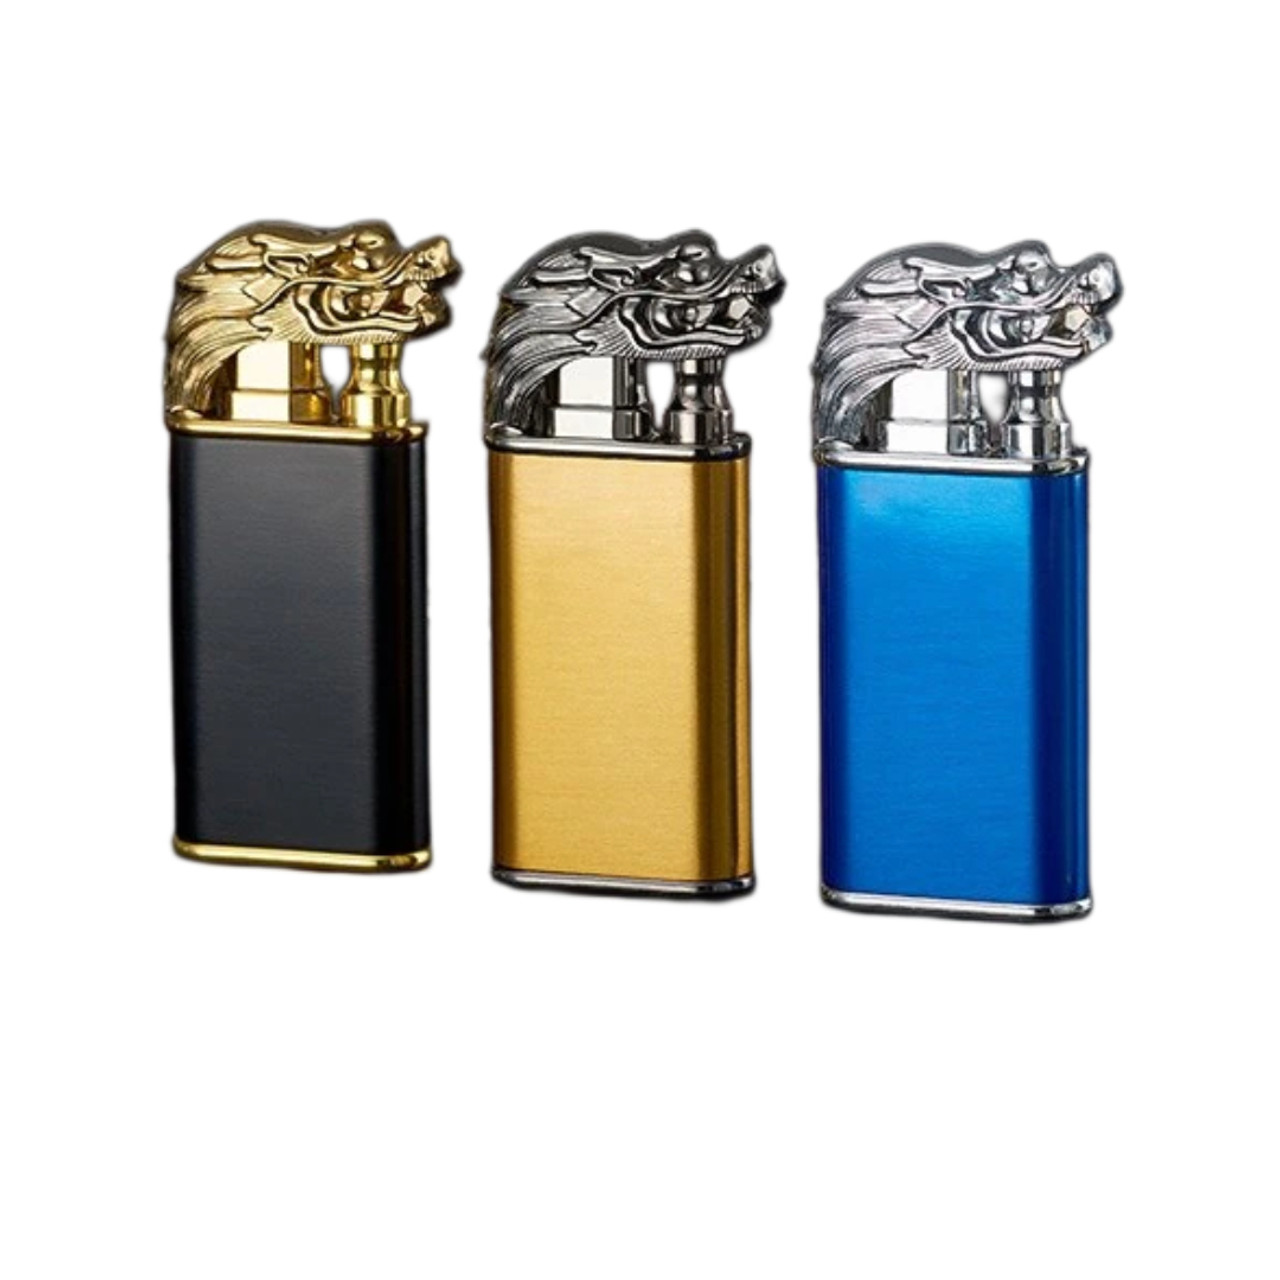 Eagle Head Double Flame Lighter, Metal Torch Turbo Double Fire